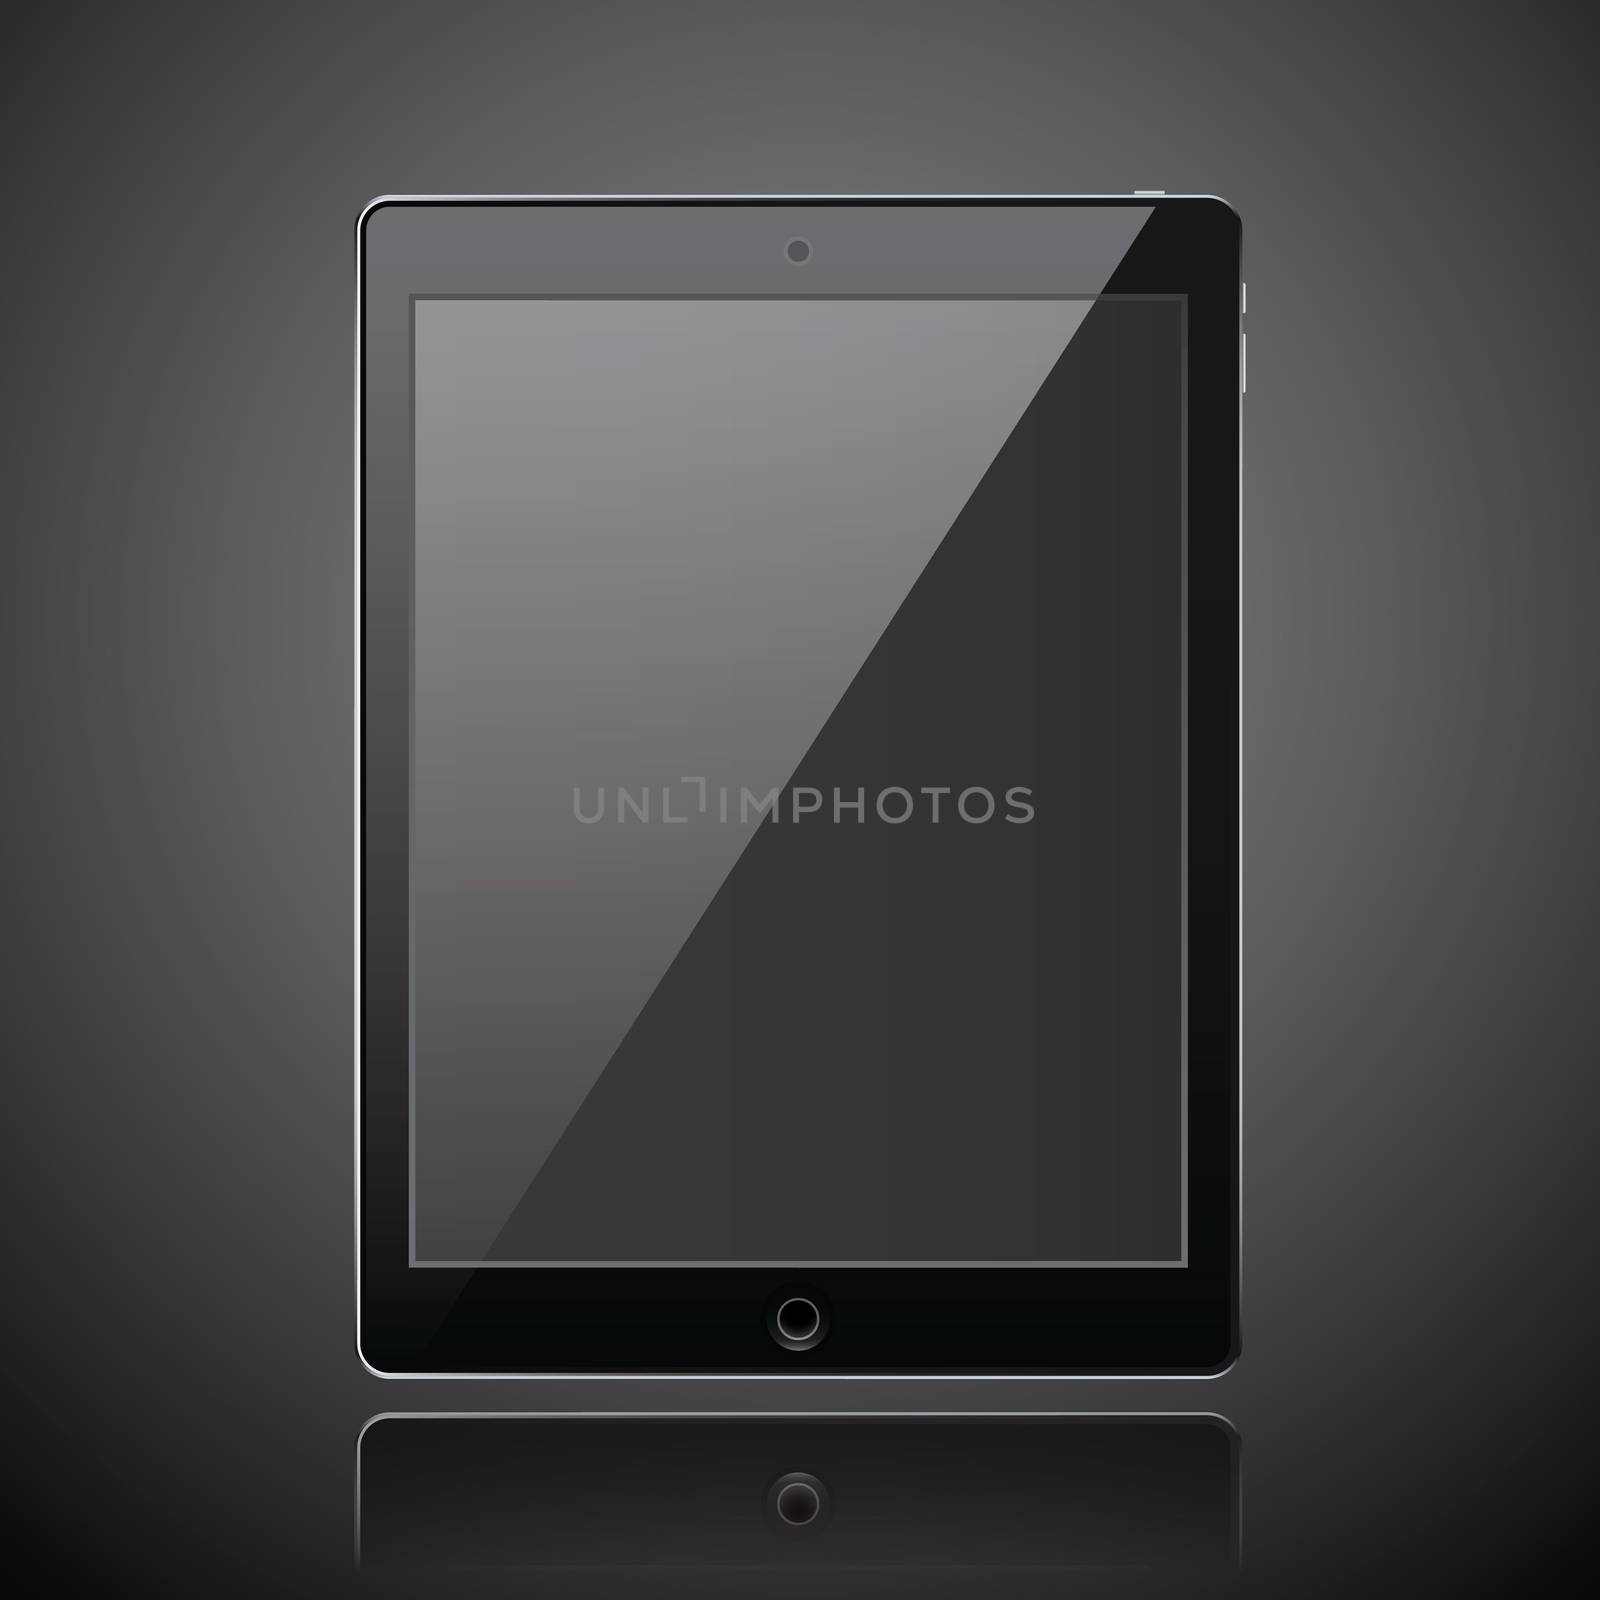 New realistic tablet modern style dark background with reflection.